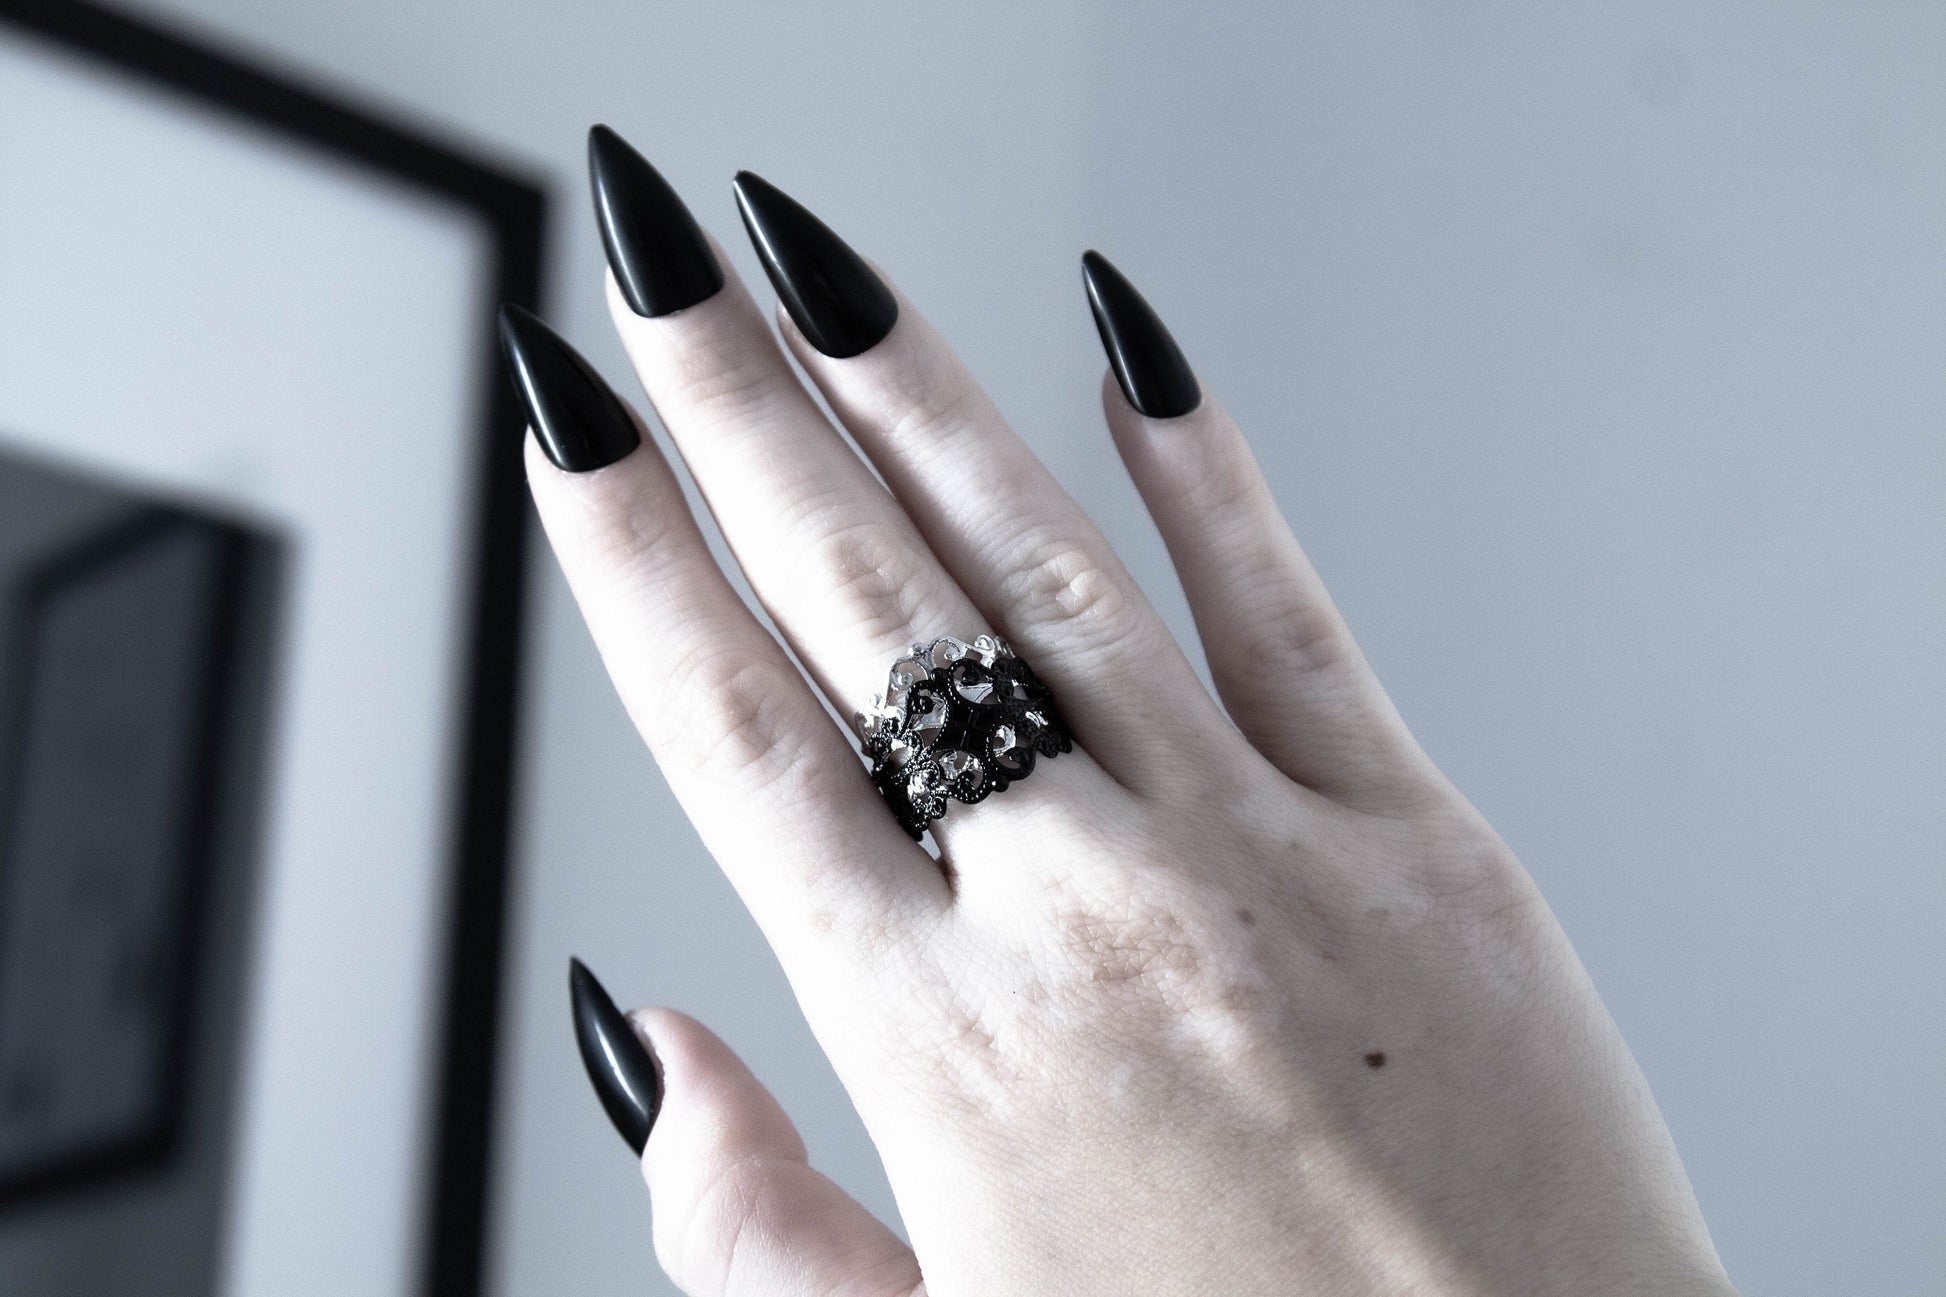 Myril Jewels' signature dark-avantgarde ring graces a hand with bold black nails, embodying the essence of Neo Gothic style. This statement piece, perfect for Gothic Lolita, Gothic-chic, and Witchcore enthusiasts, adds a touch of sophisticated punk to everyday wear. Ideal for Halloween or as a daring jewelry choice for those who celebrate the unique and alternative.